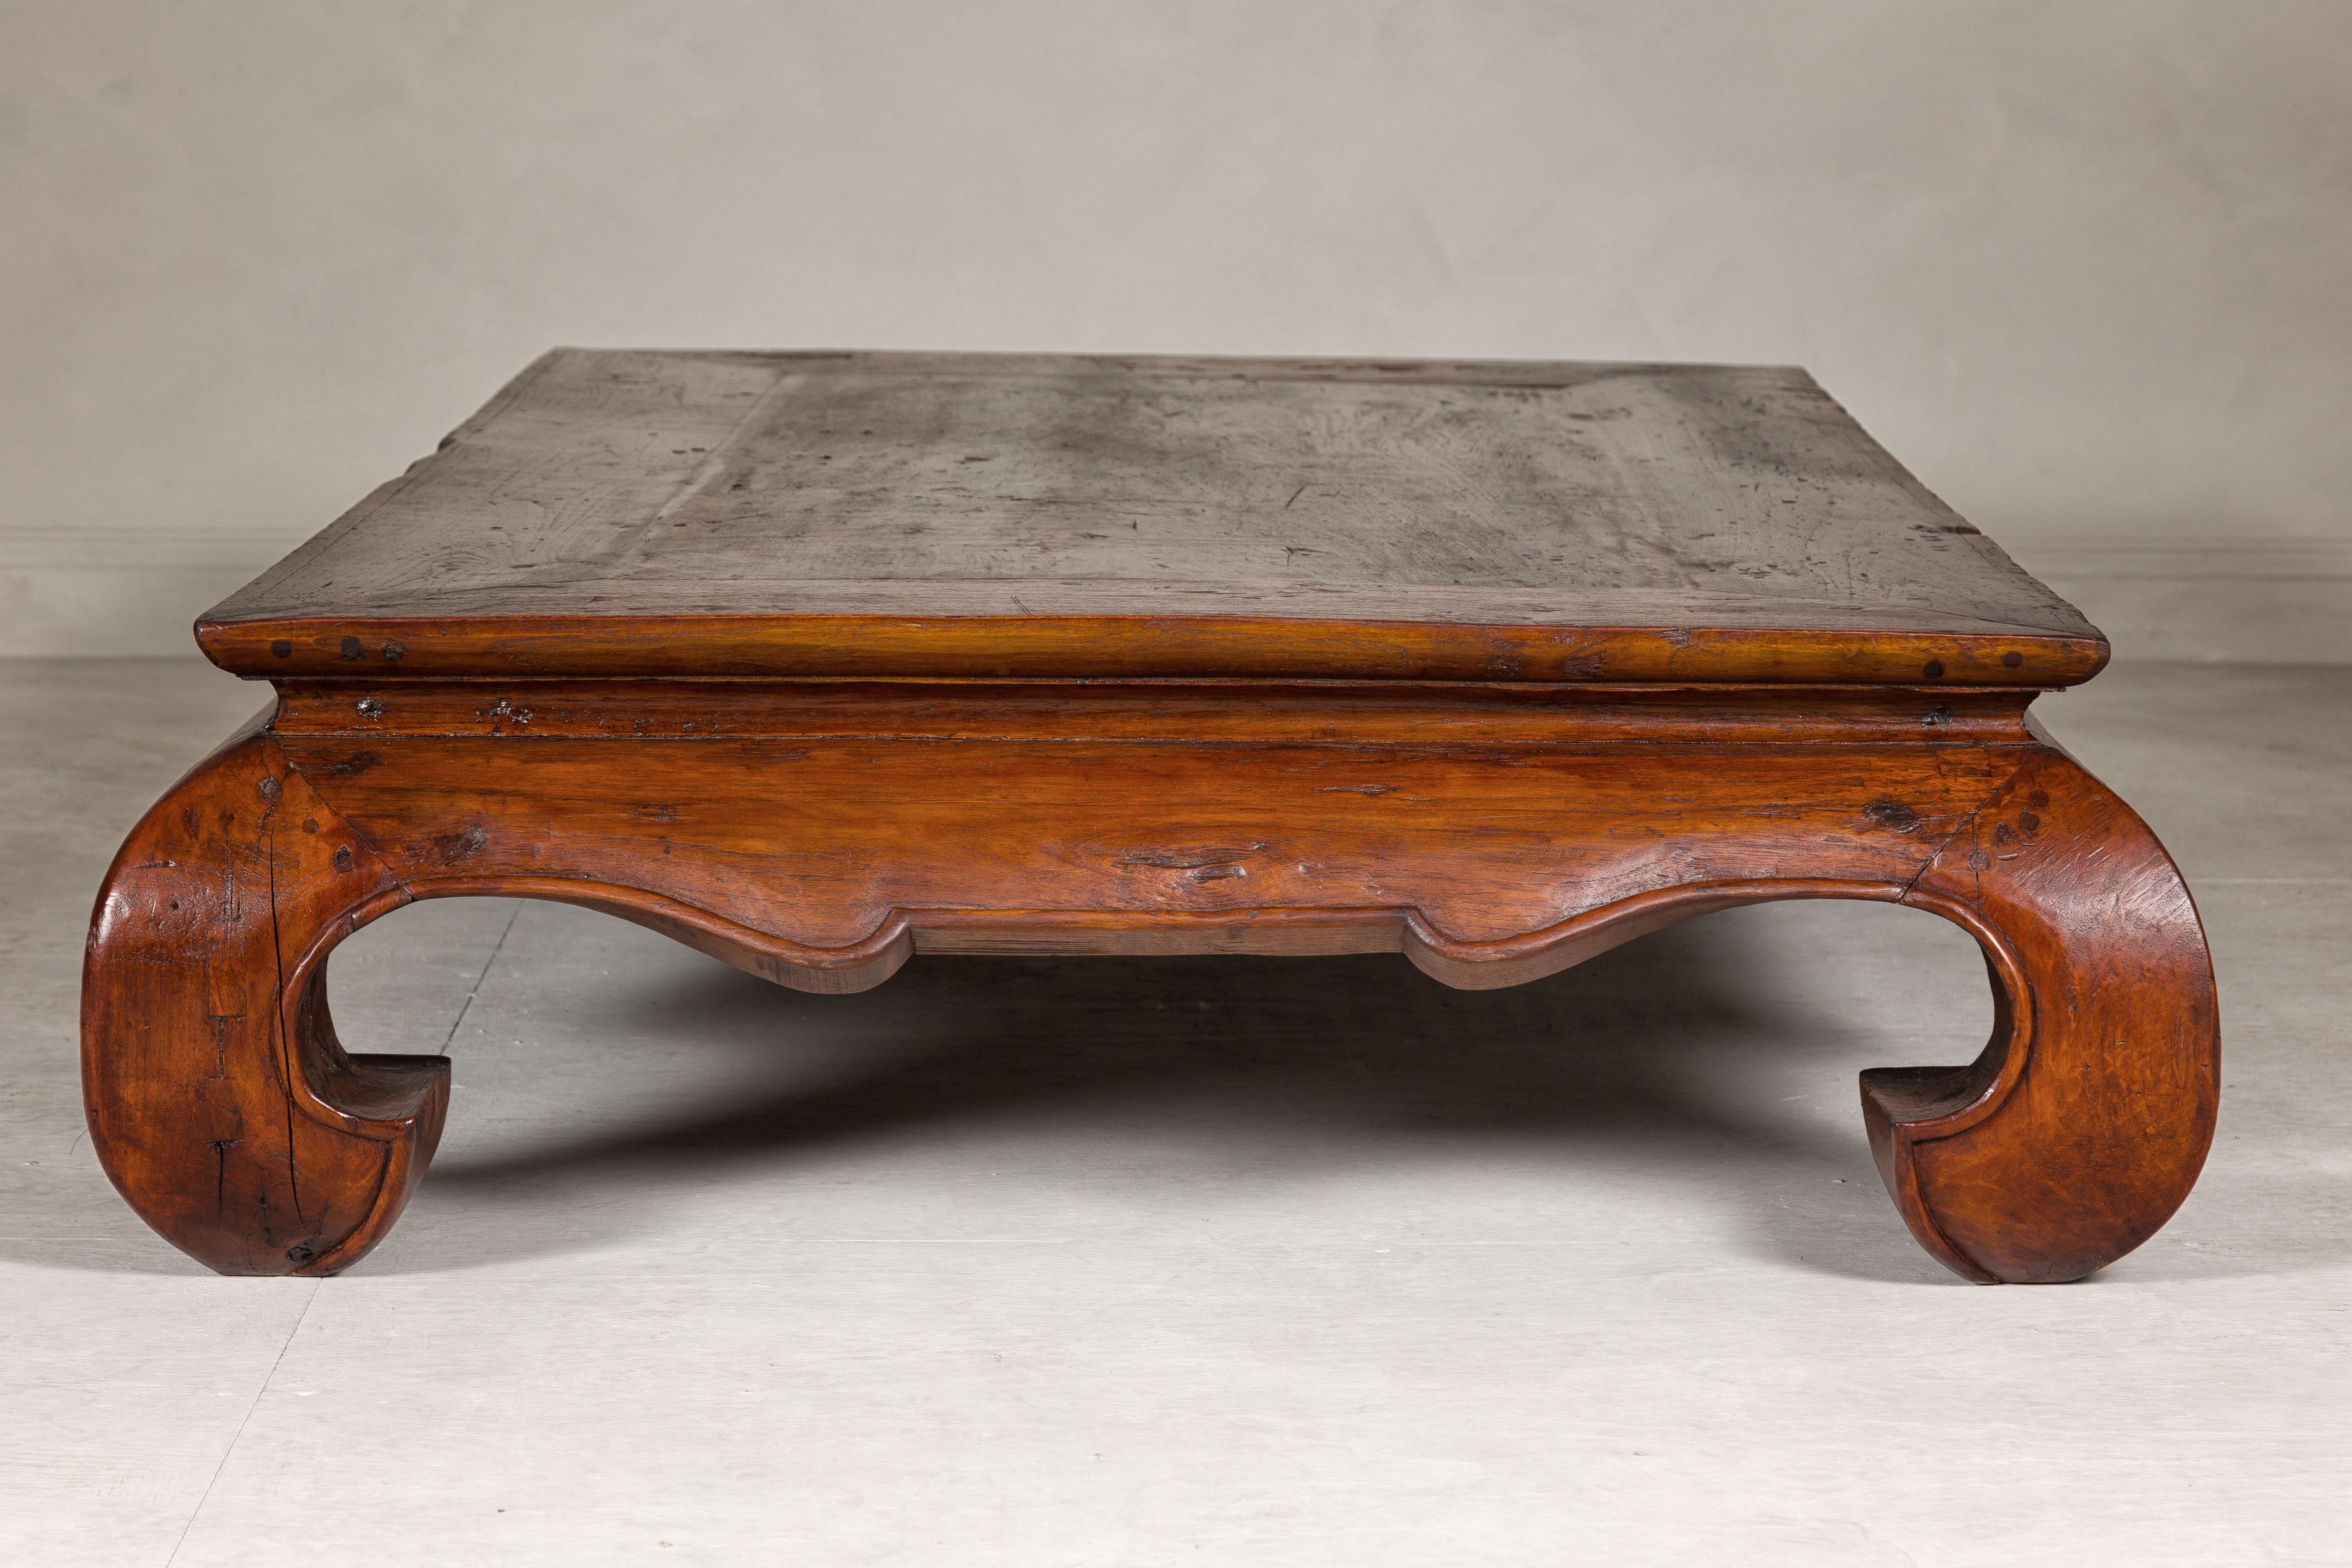 Qing Dynasty 19th Century Chow Leg Kang Table with Weathered Rustic Patina For Sale 7